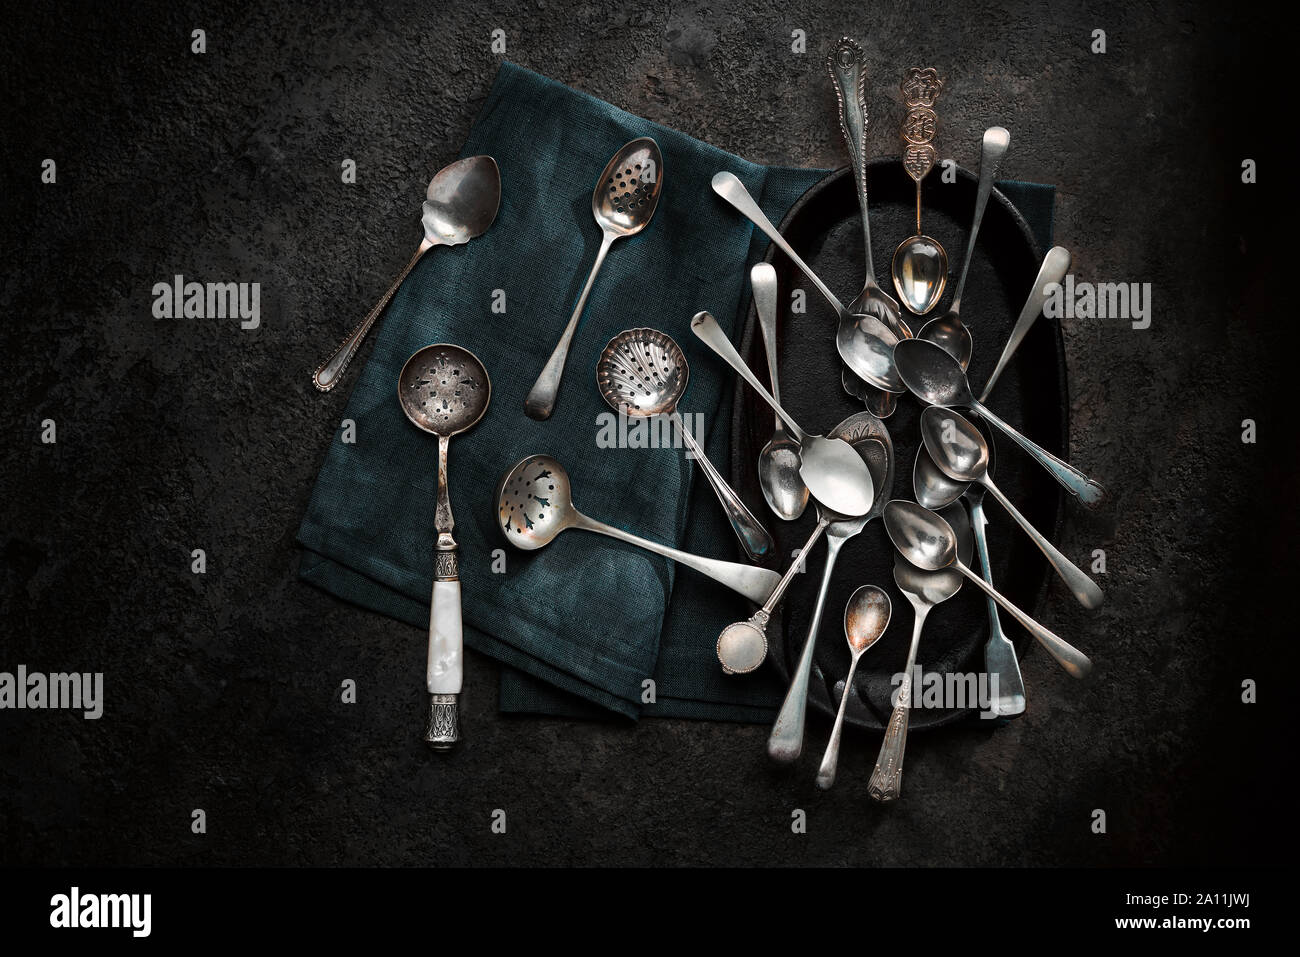 Vintage spoons shot from above on dark background. Stock Photo